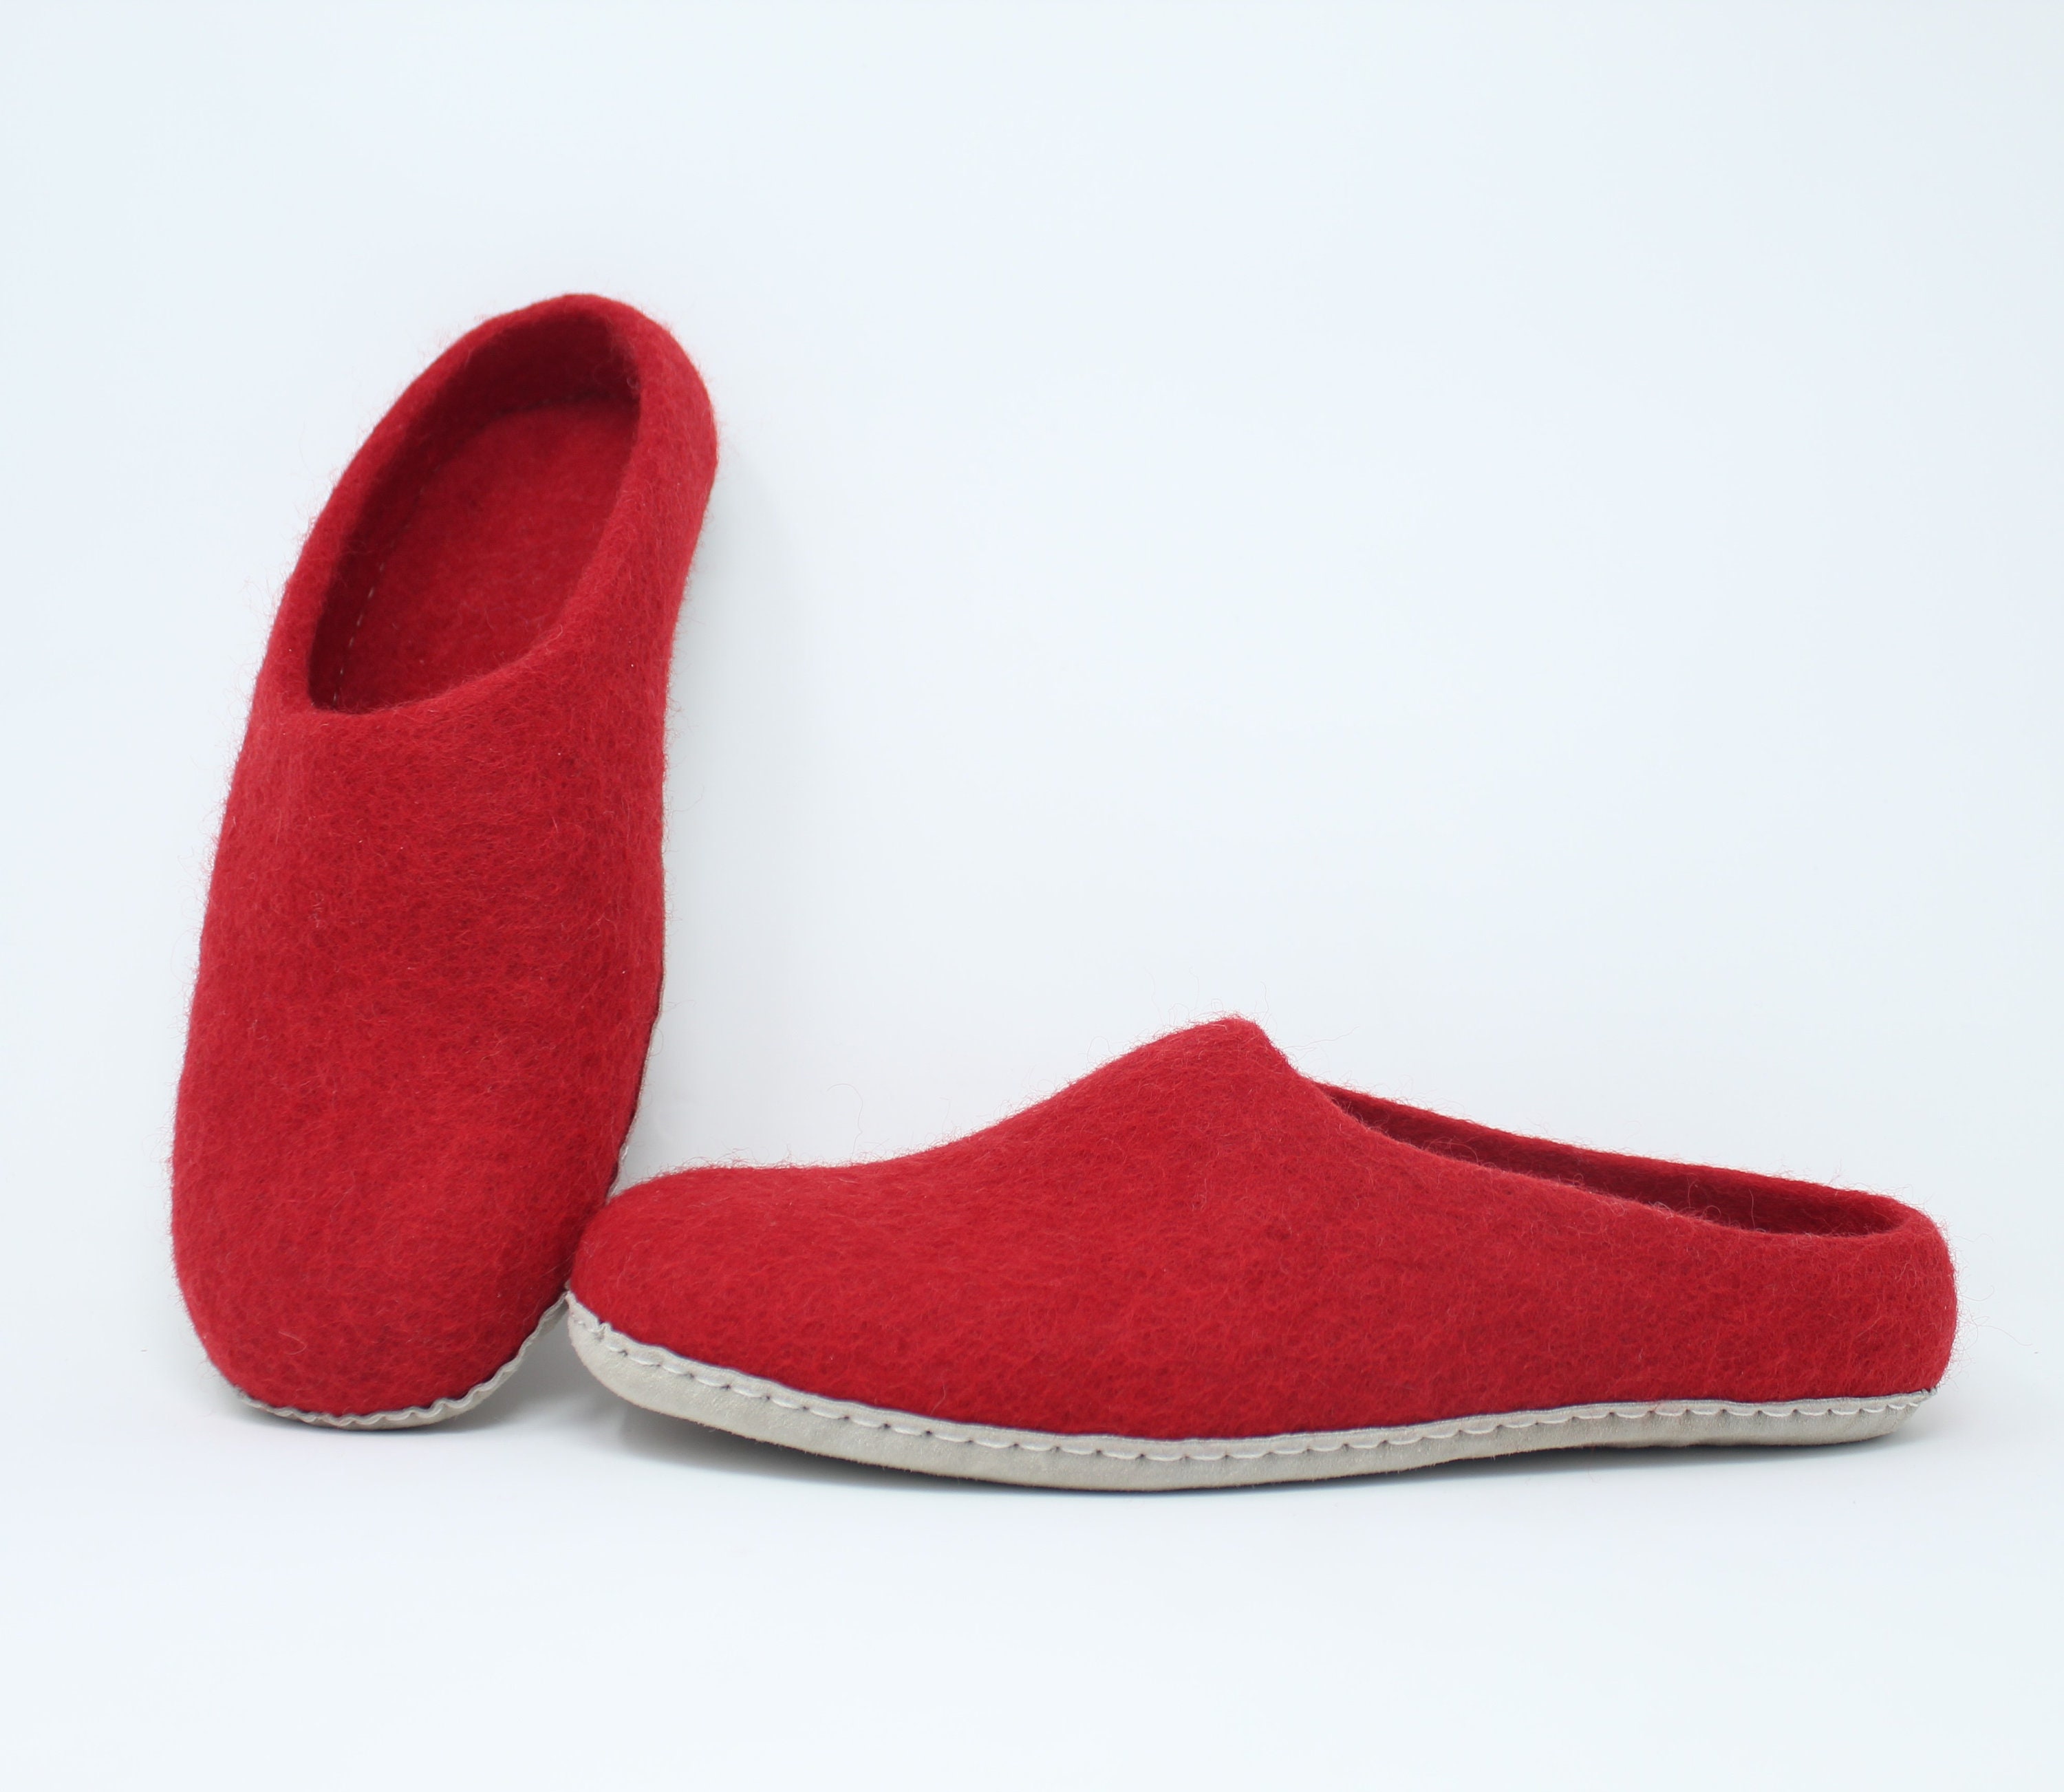 Felted Wool Women’s Red Slippers | Gift for Her | Sheep Wool Slippers ...